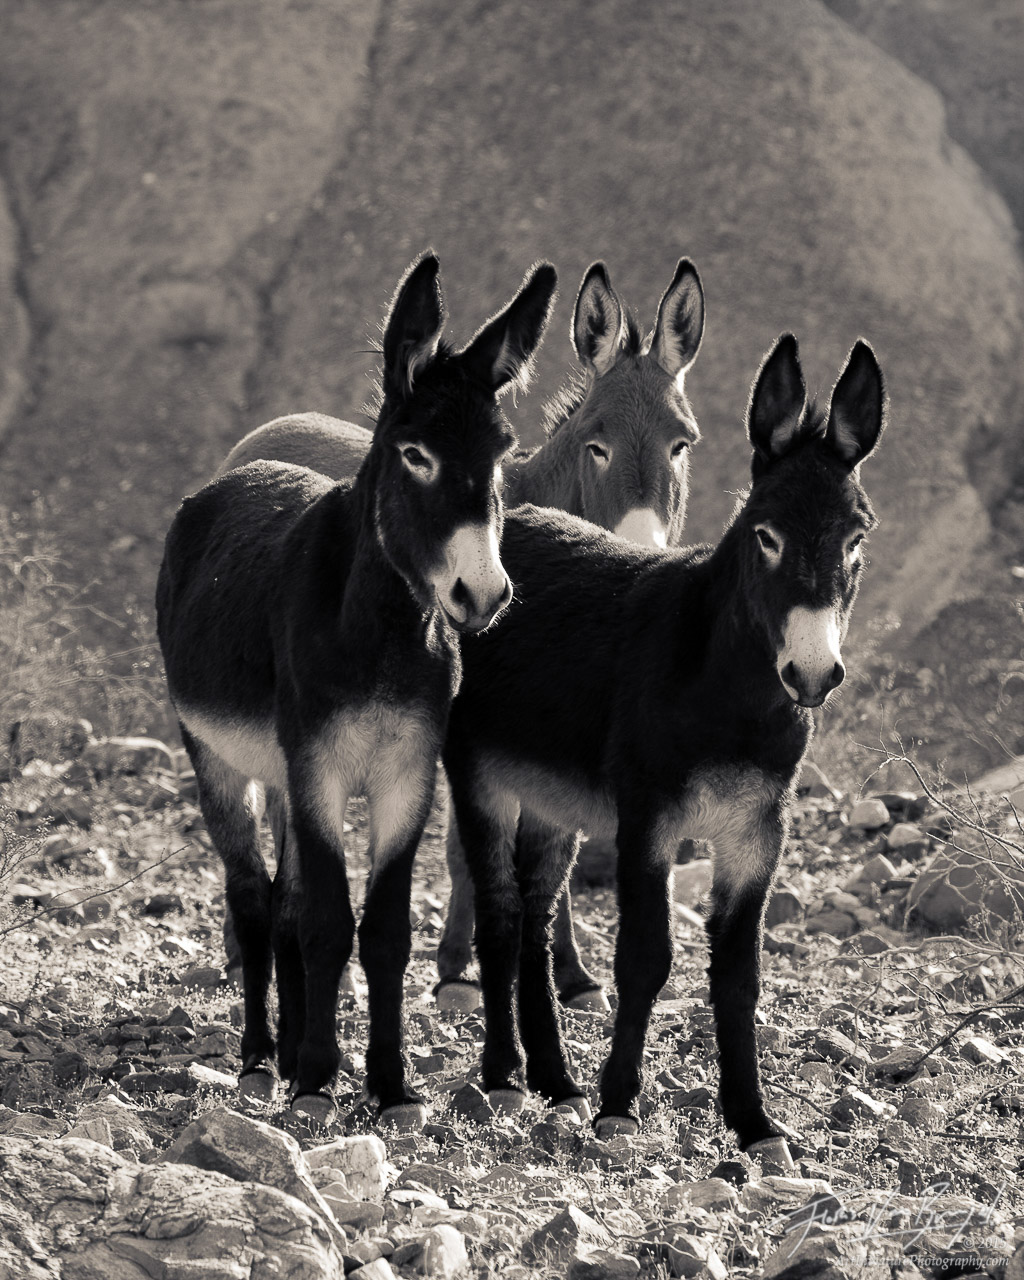 A group of wild Burros poses in a remote canyon in Panamint Valley under the harsh sun. Burros were introduced to the southern...